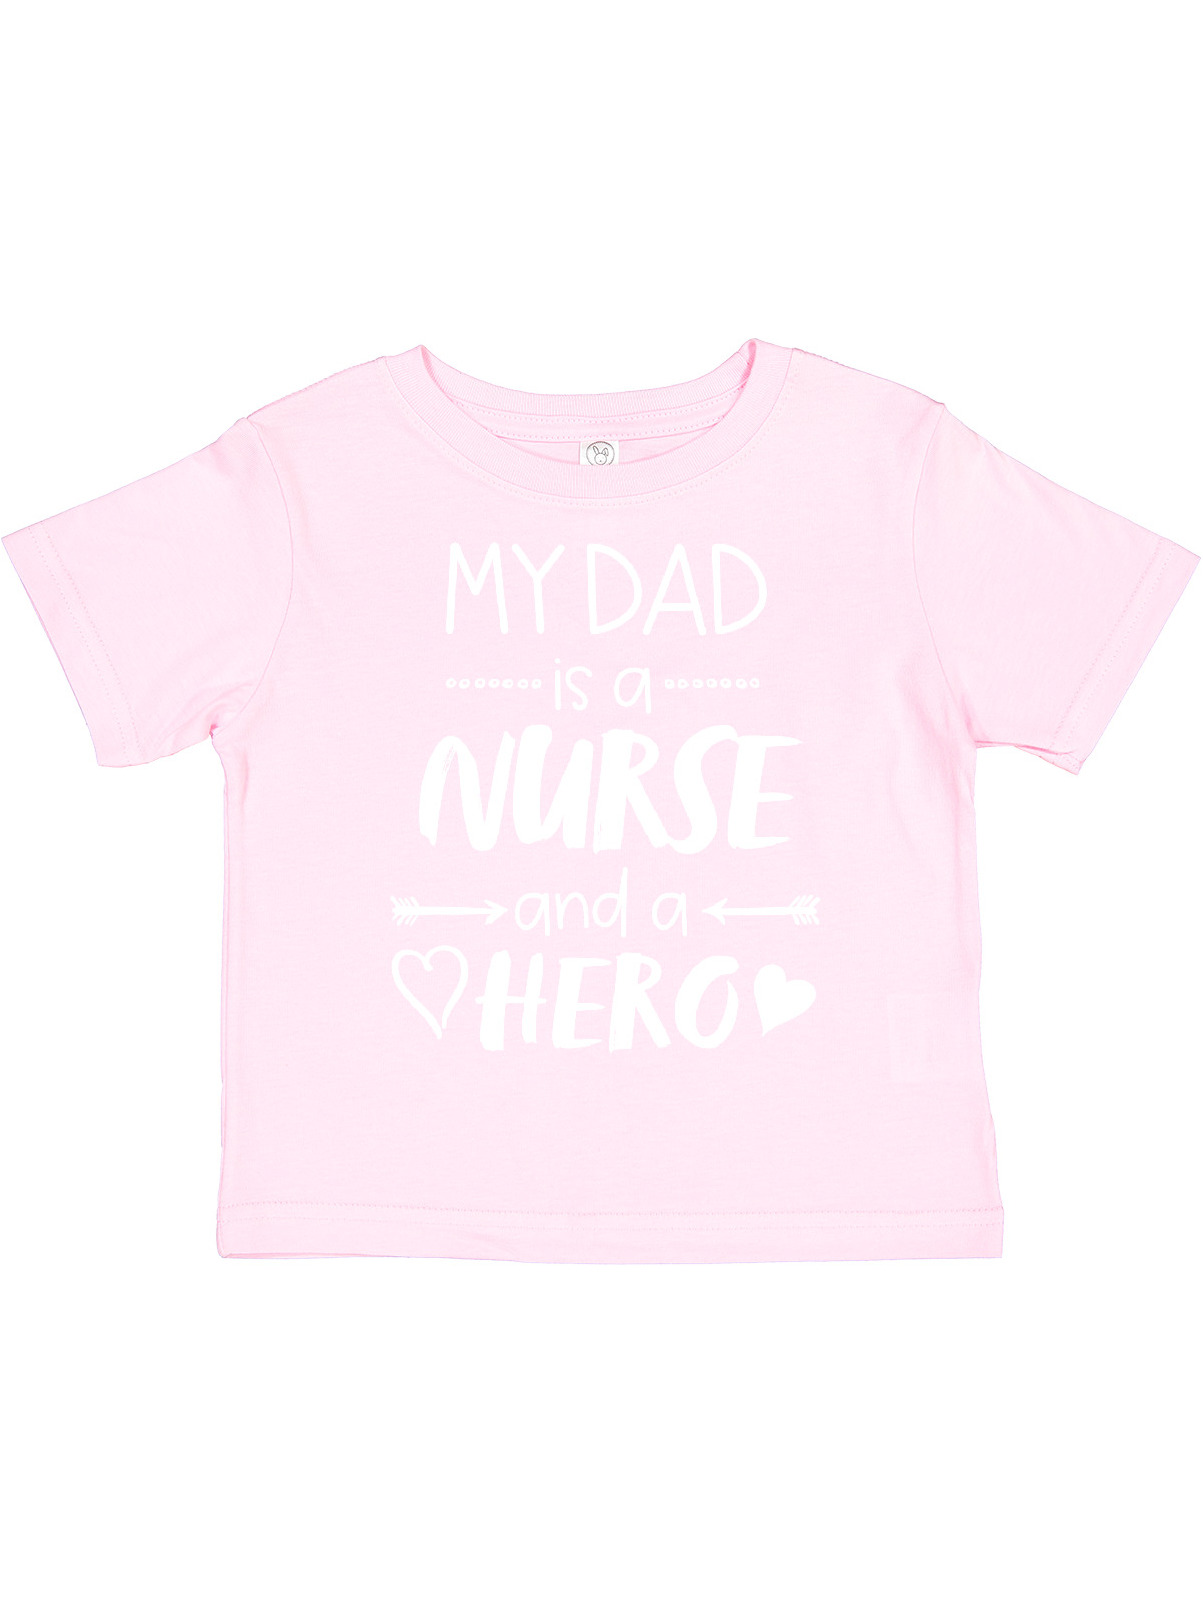 Inktastic My Dad is a Nurse and a Hero Gift Toddler Boy or Toddler Girl T-Shirt - image 1 of 4